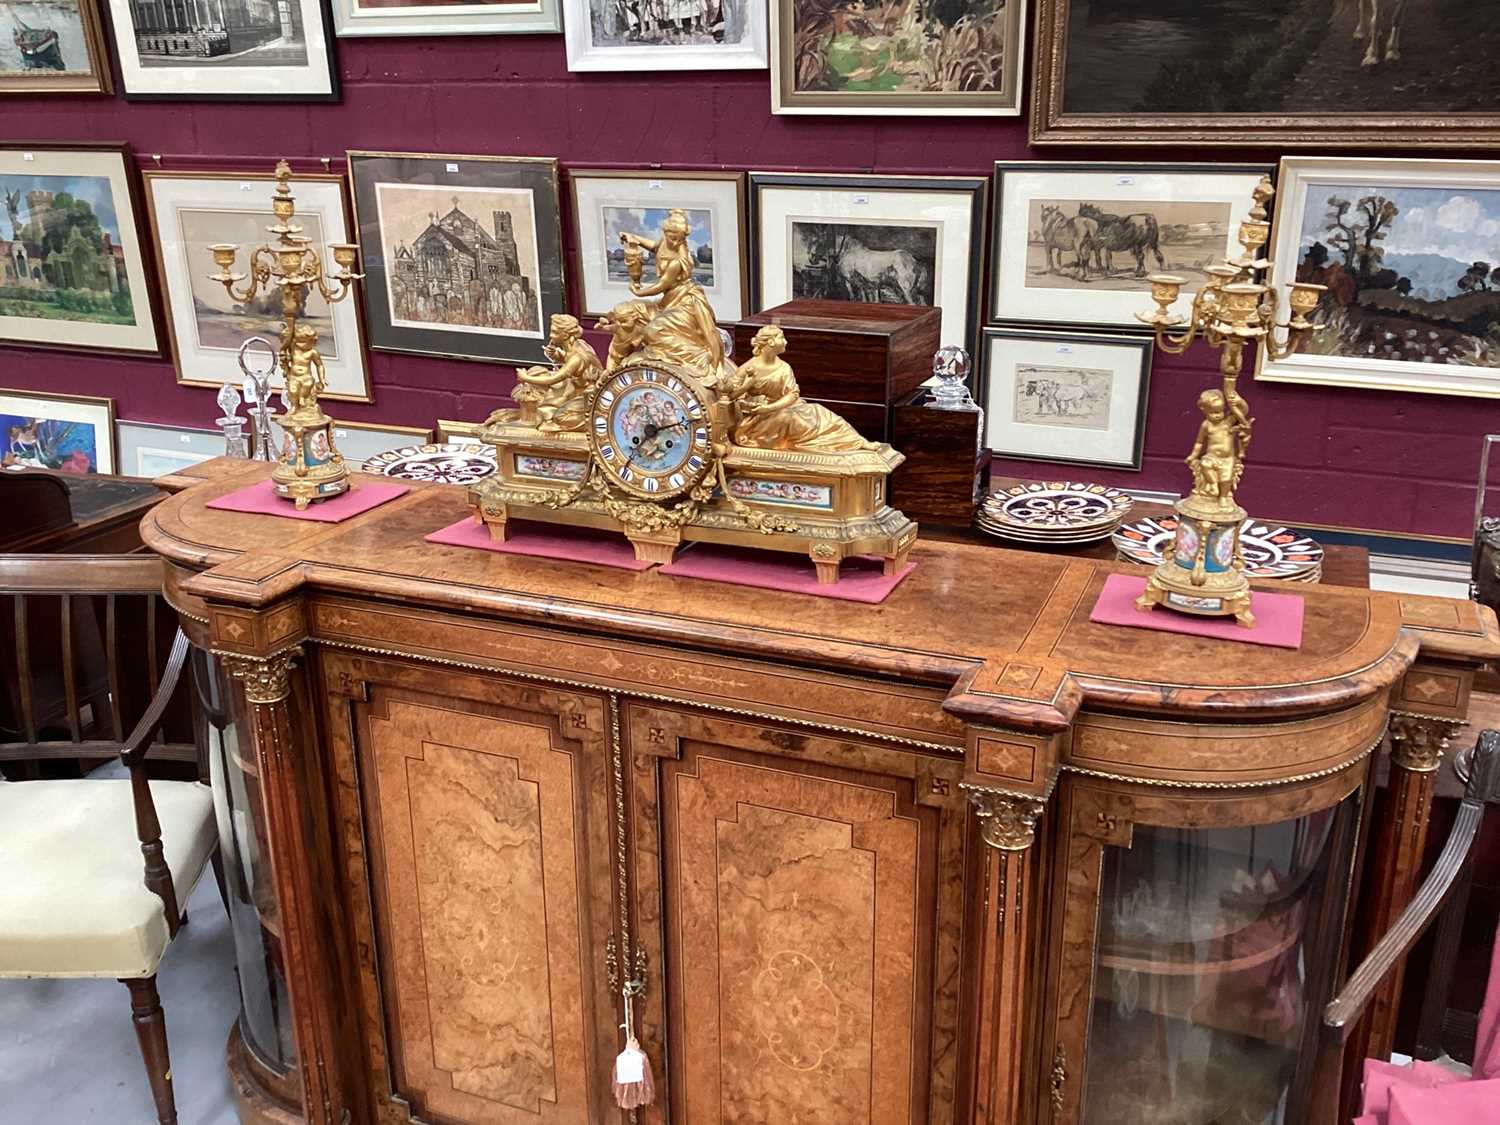 Fine quality large 19th century French ormolu clock garniture by Lerolle à Paris with Sèvres porcela - Image 21 of 26